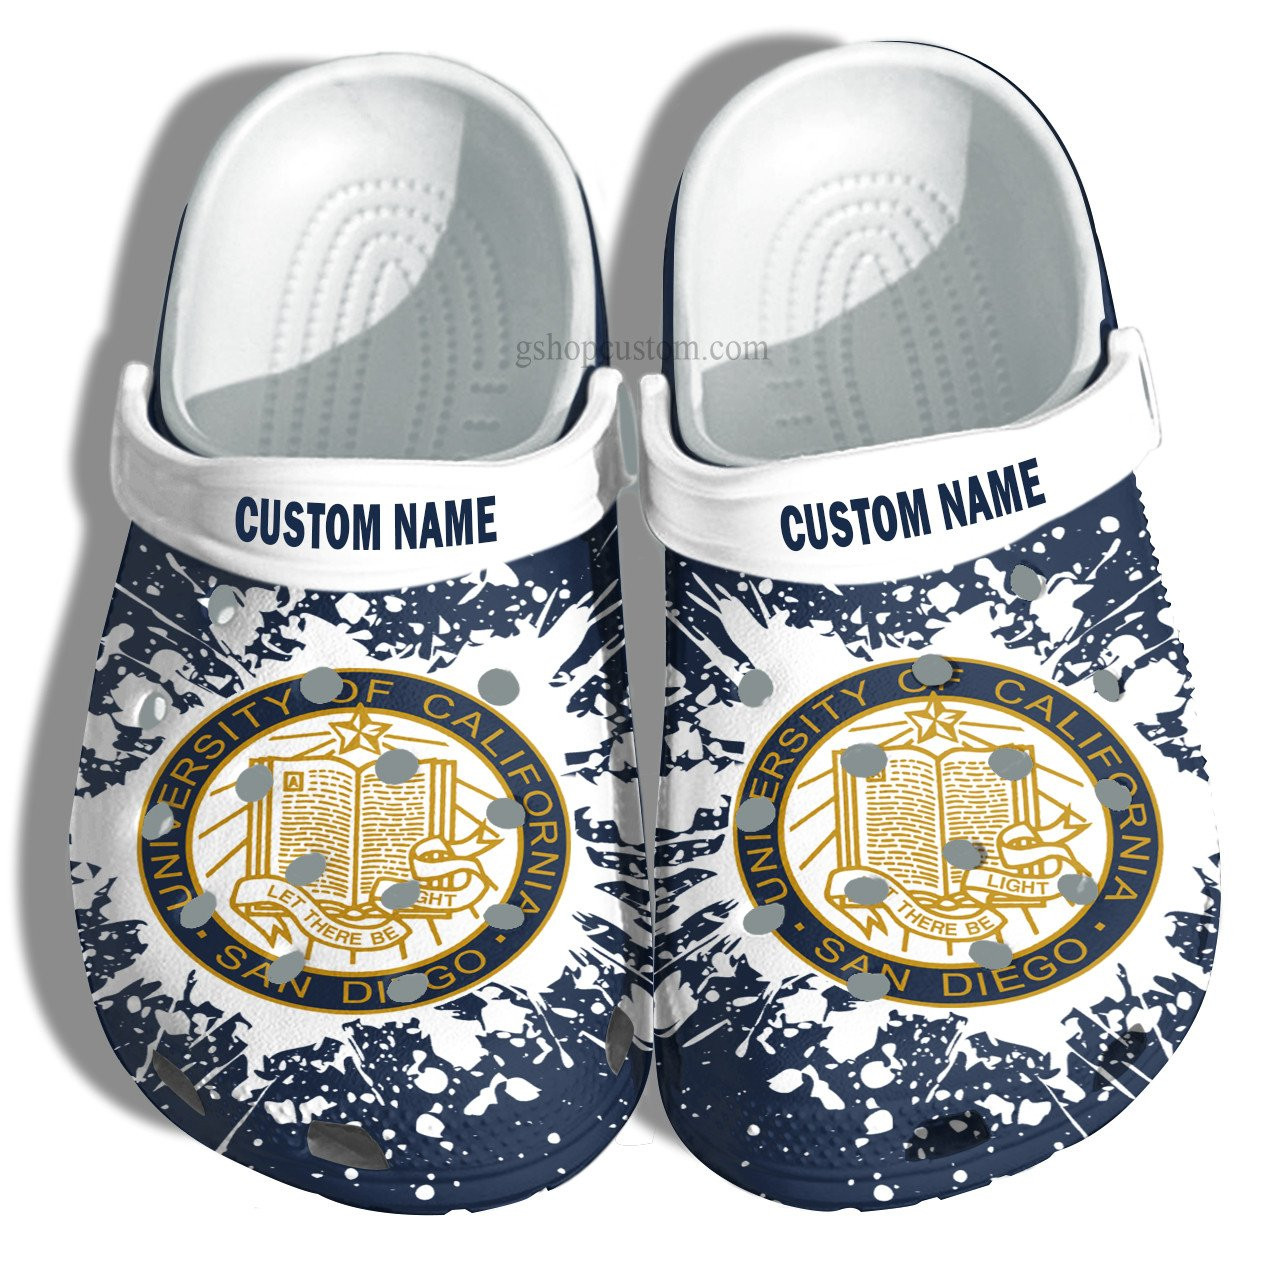 University Of California San Diego Graduation Gifts Croc Shoes Customize- Admission Gift Crocs Shoes